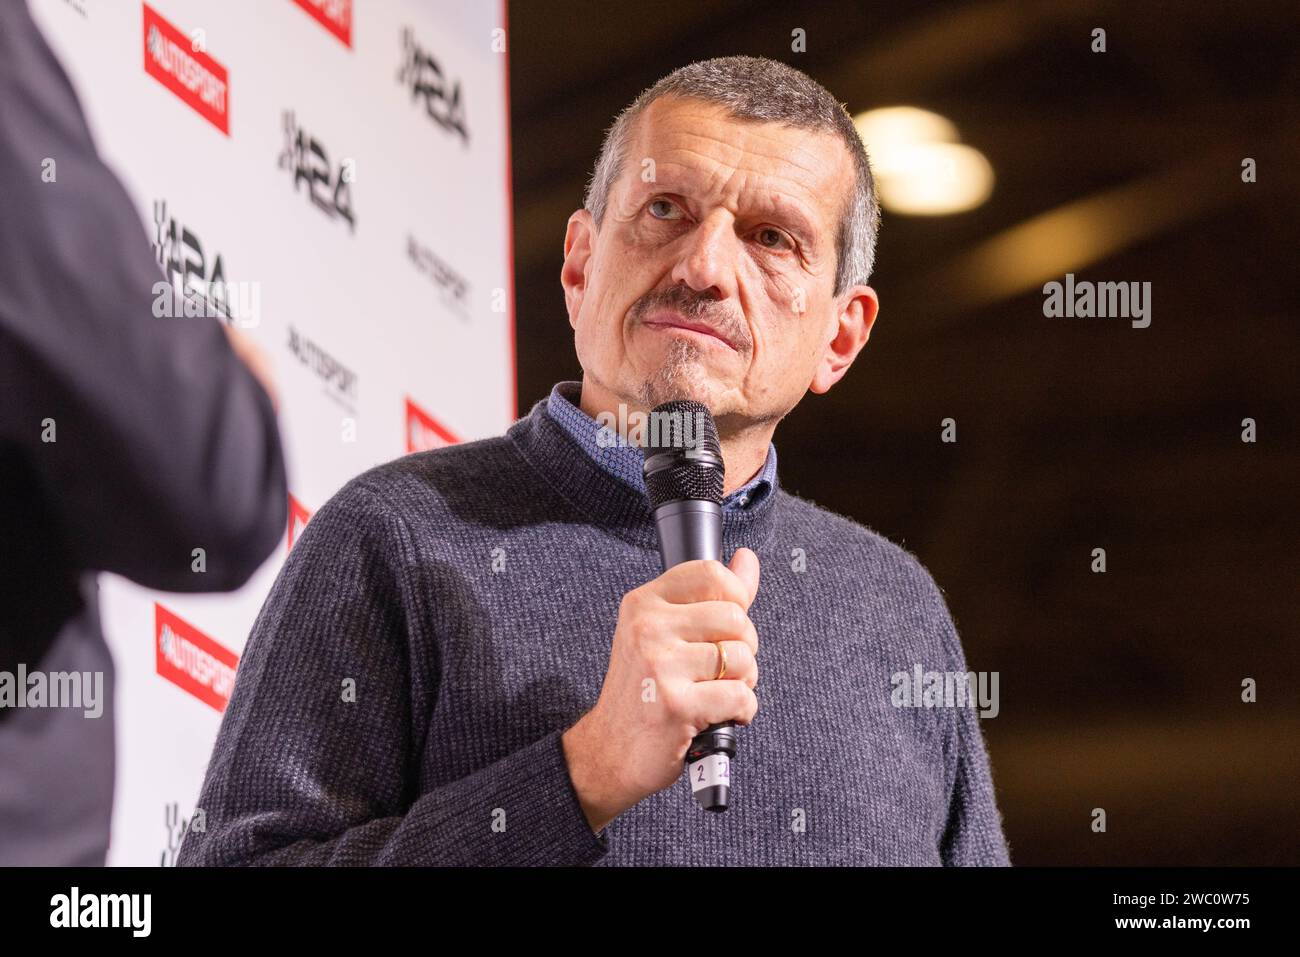 Birmingham, UK. 13 Jan, 2024. Former Haas team principle Gunther Steiner as he chats to Sky Sports F1 Commentator David 'Crofty' Croft at the main stage of Autosport International 2024. Credit Milo Chandler/Alamy Live News Stock Photo